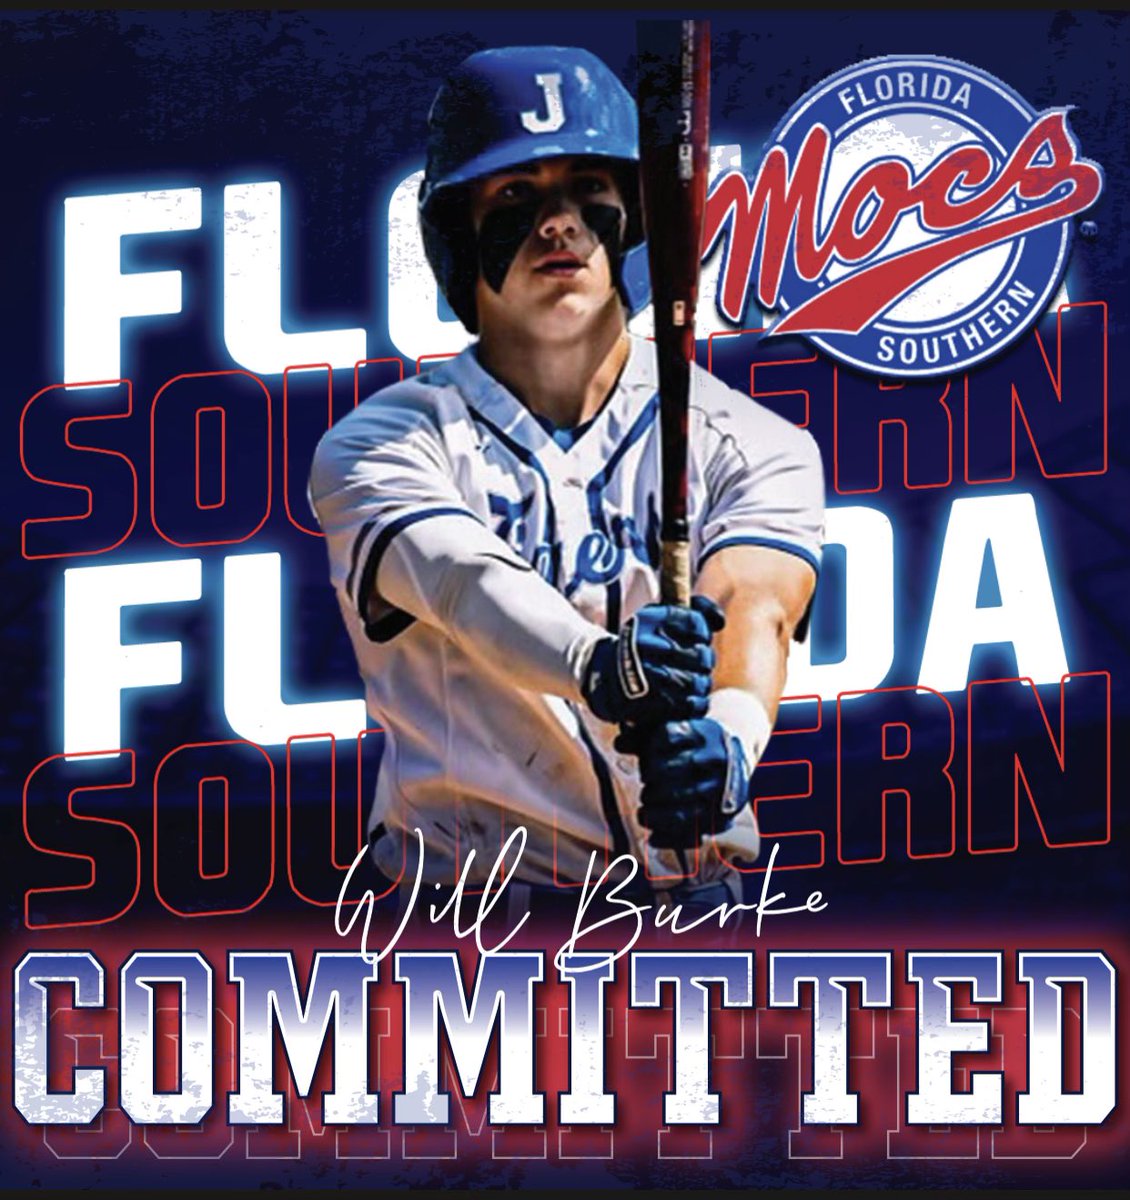 100% COMMITTED! #LetsGoMocs